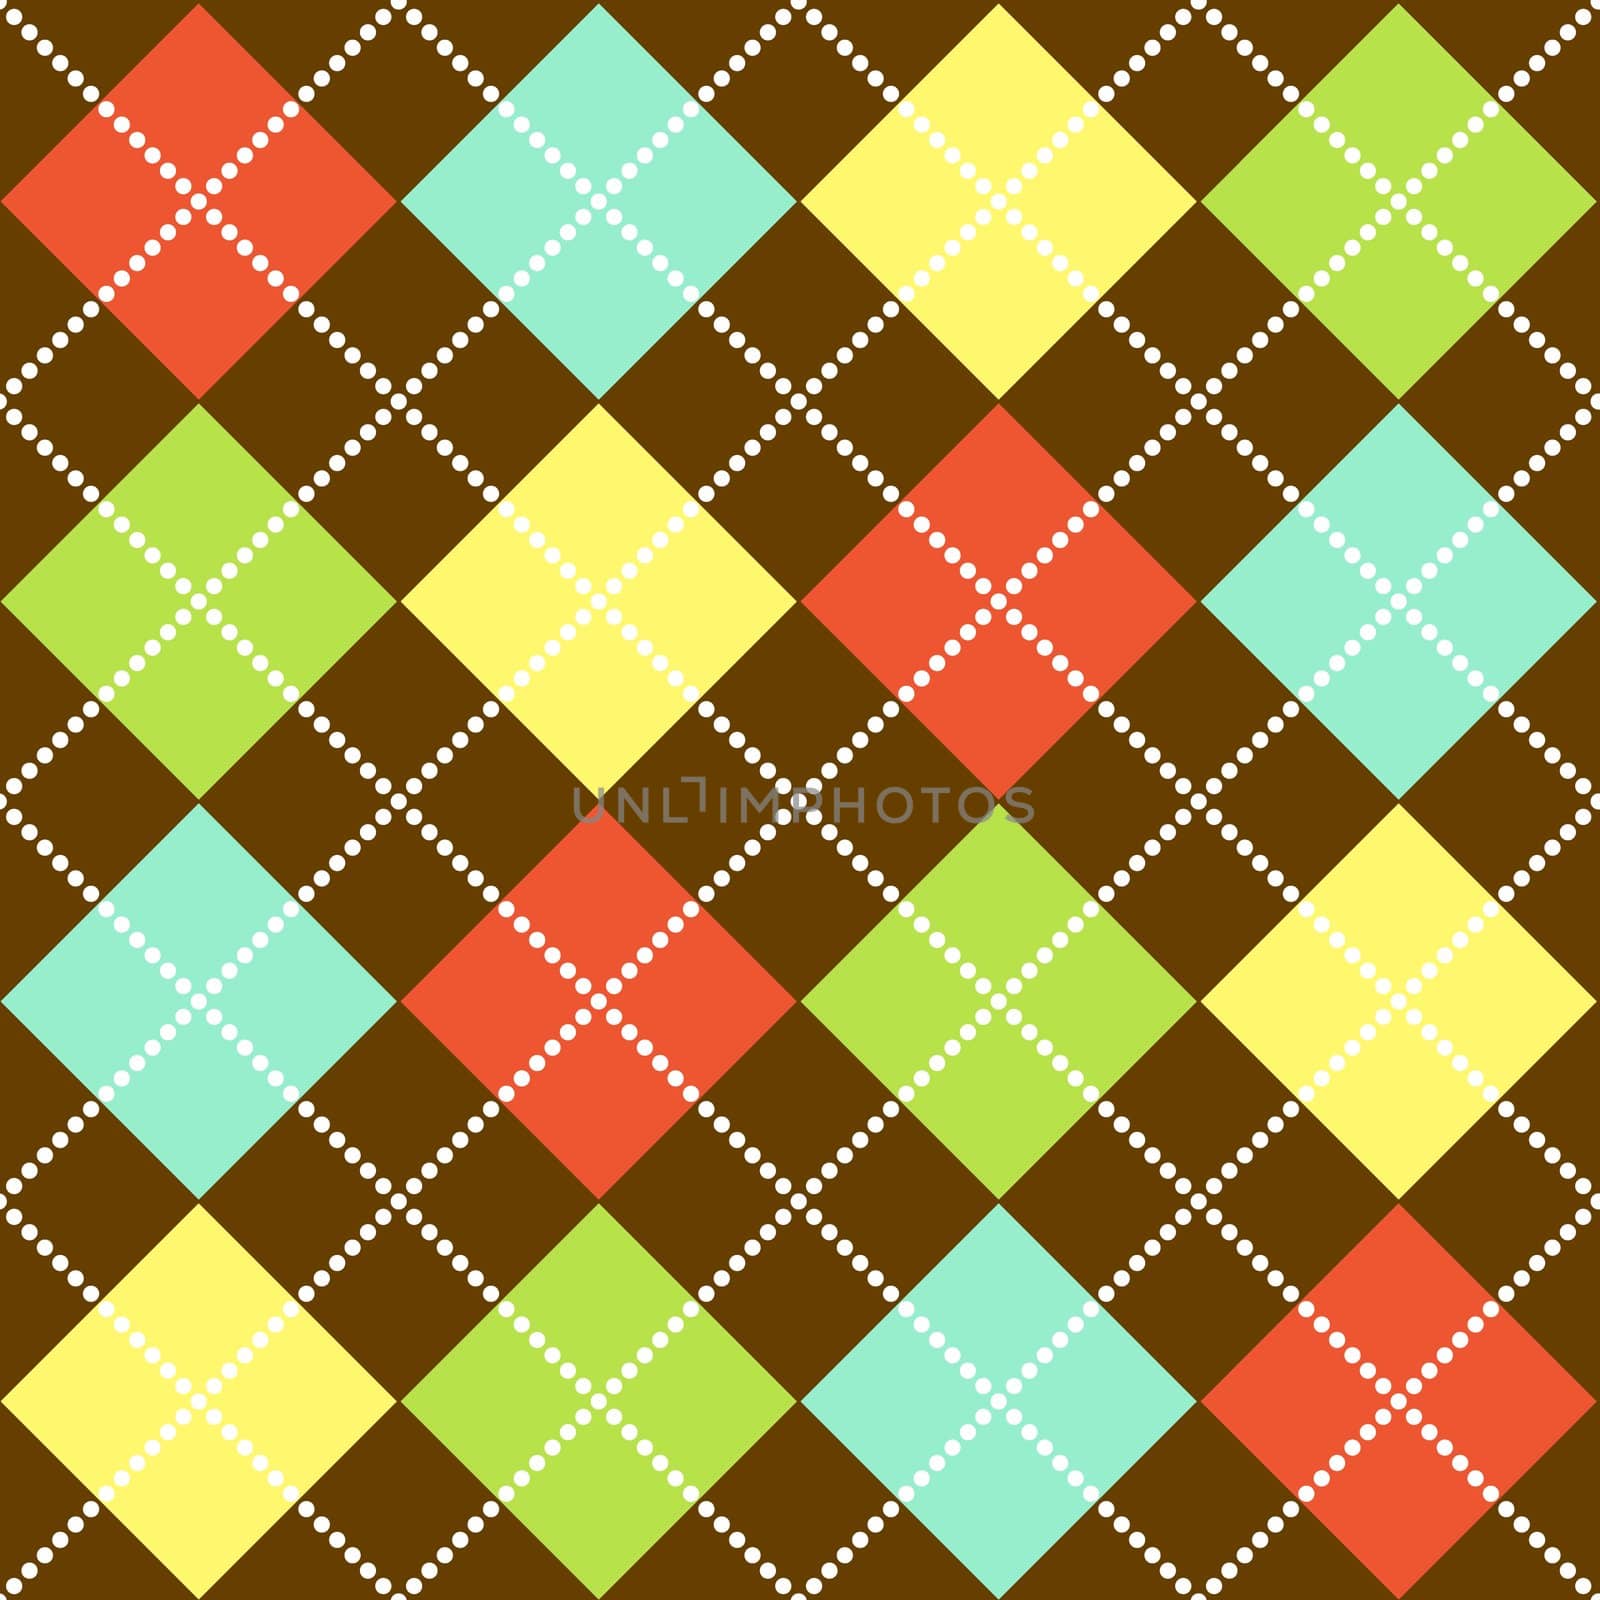 Argyle pattern in bright colors on brown background